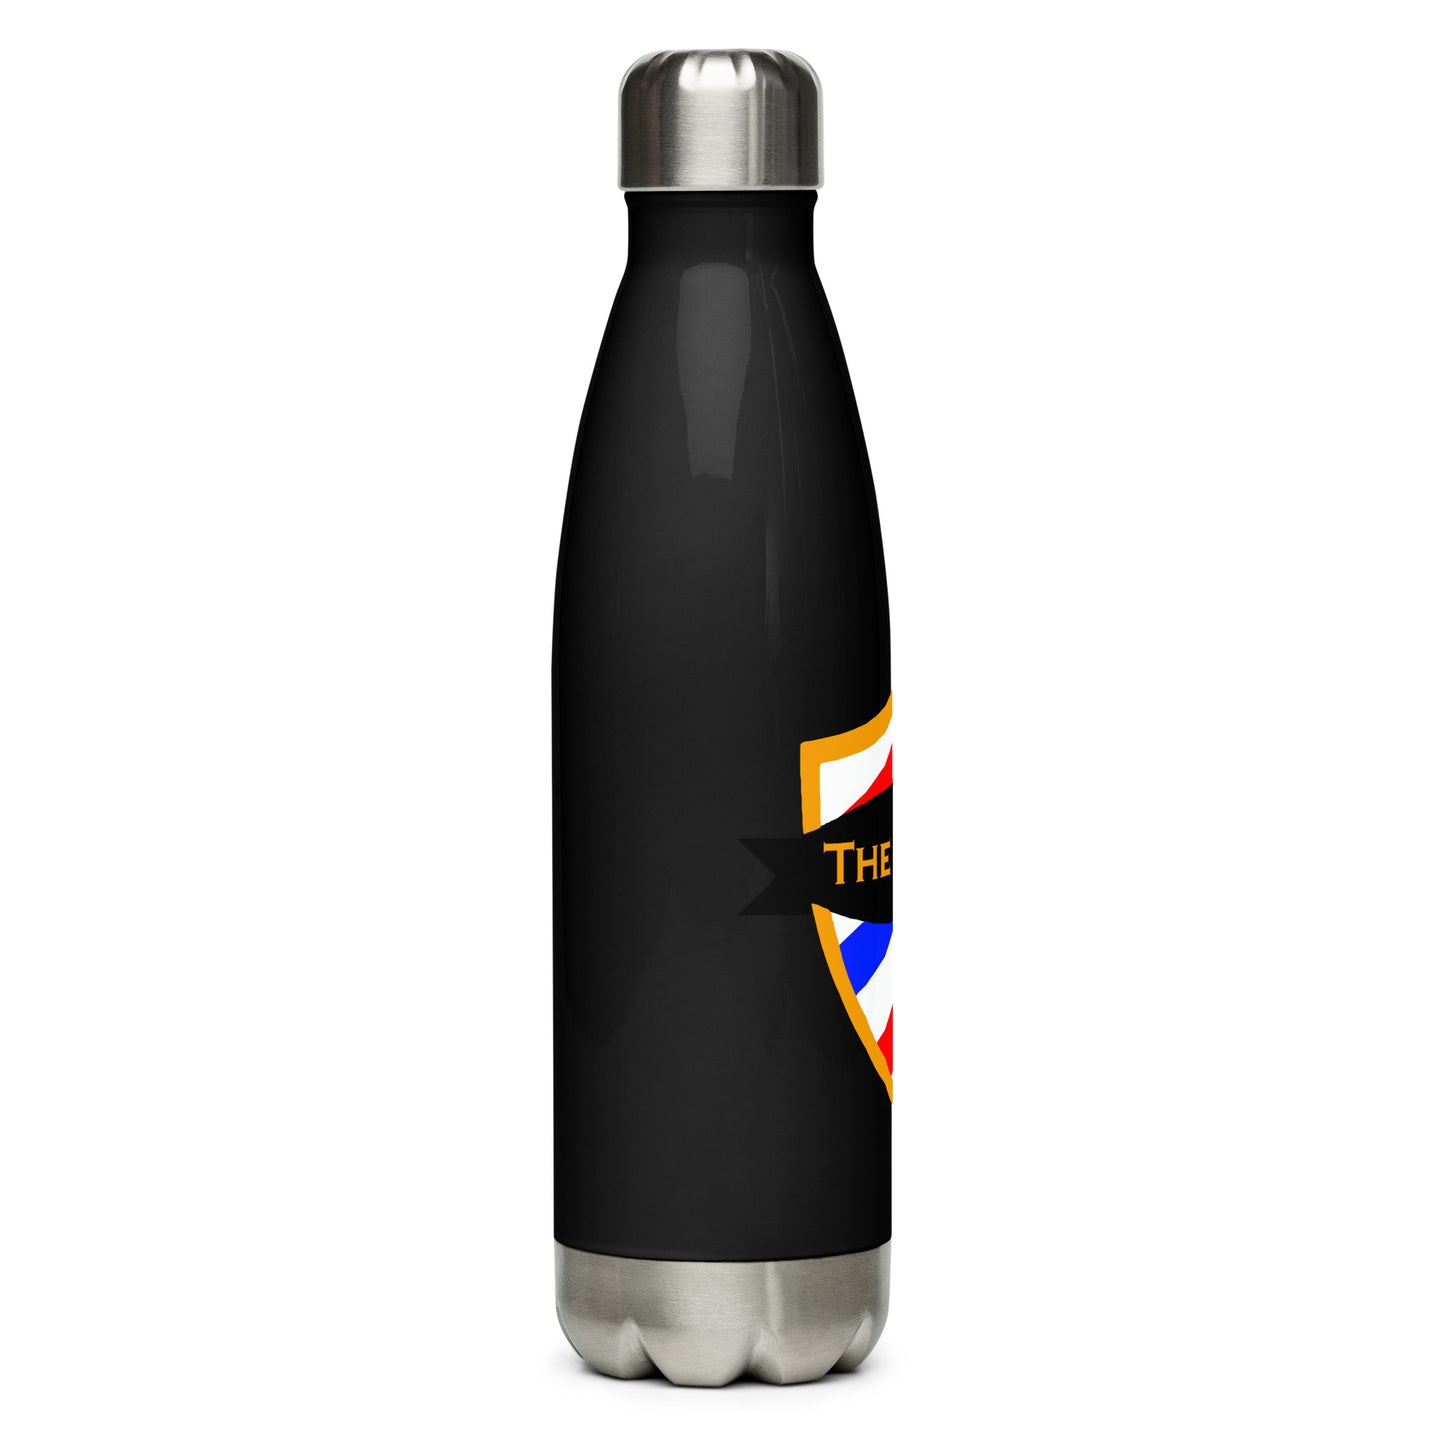 The Core - printed Stainless steel water bottle